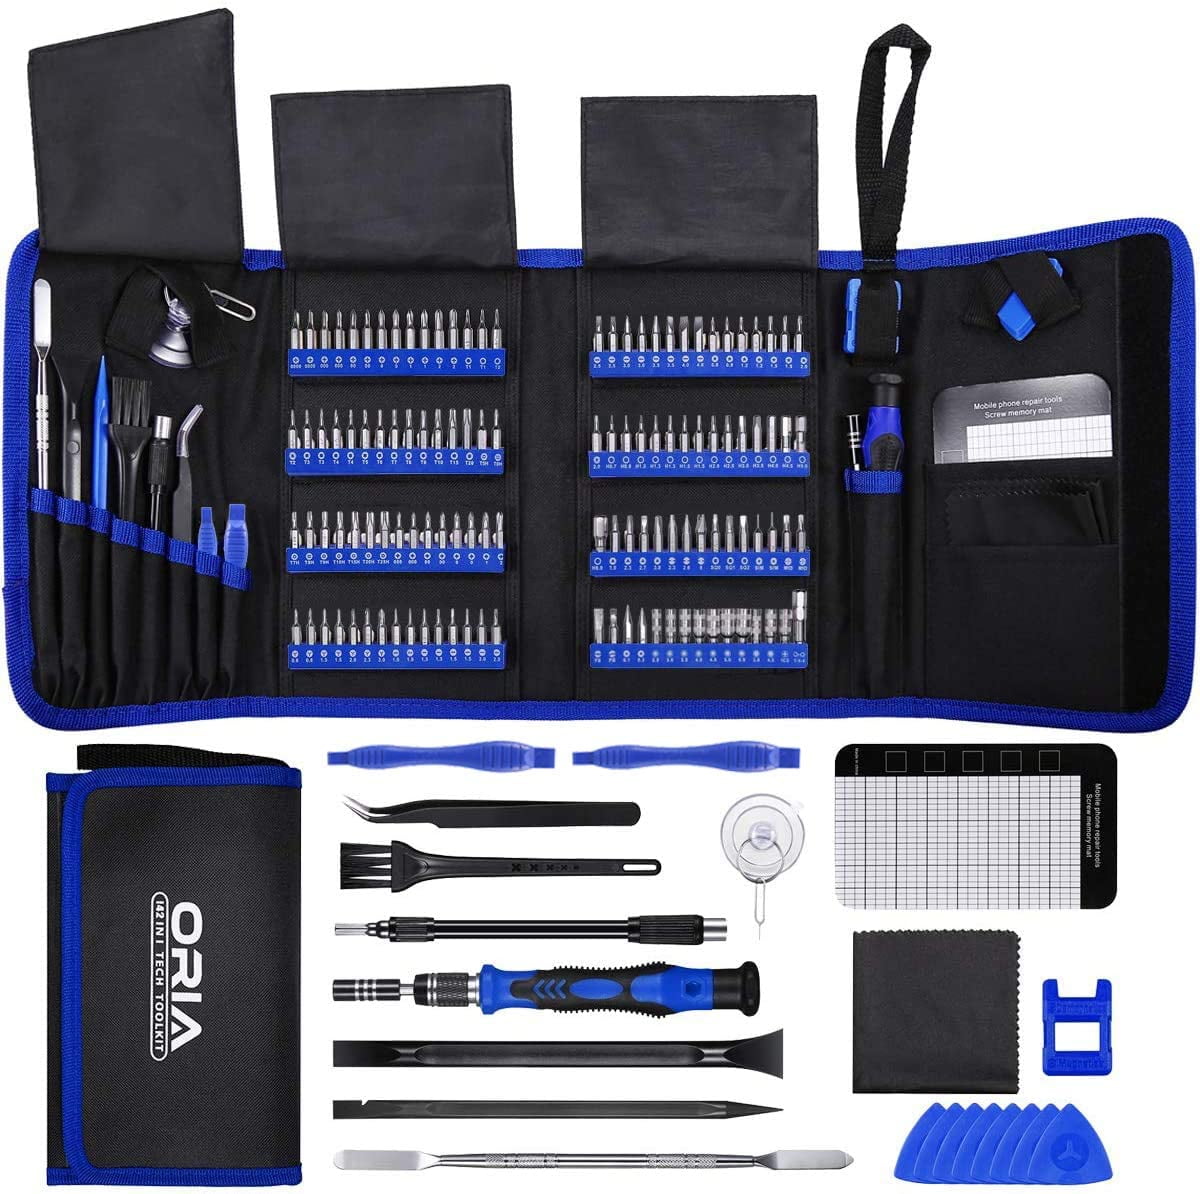 Watches Red ORIA Screwdriver Set 2020 New Magnetic Repair Tools 142 in 1 Precision Screwdriver Kit with 120 Screwdrivers Bits Portable Bag for MacBook Laptop 